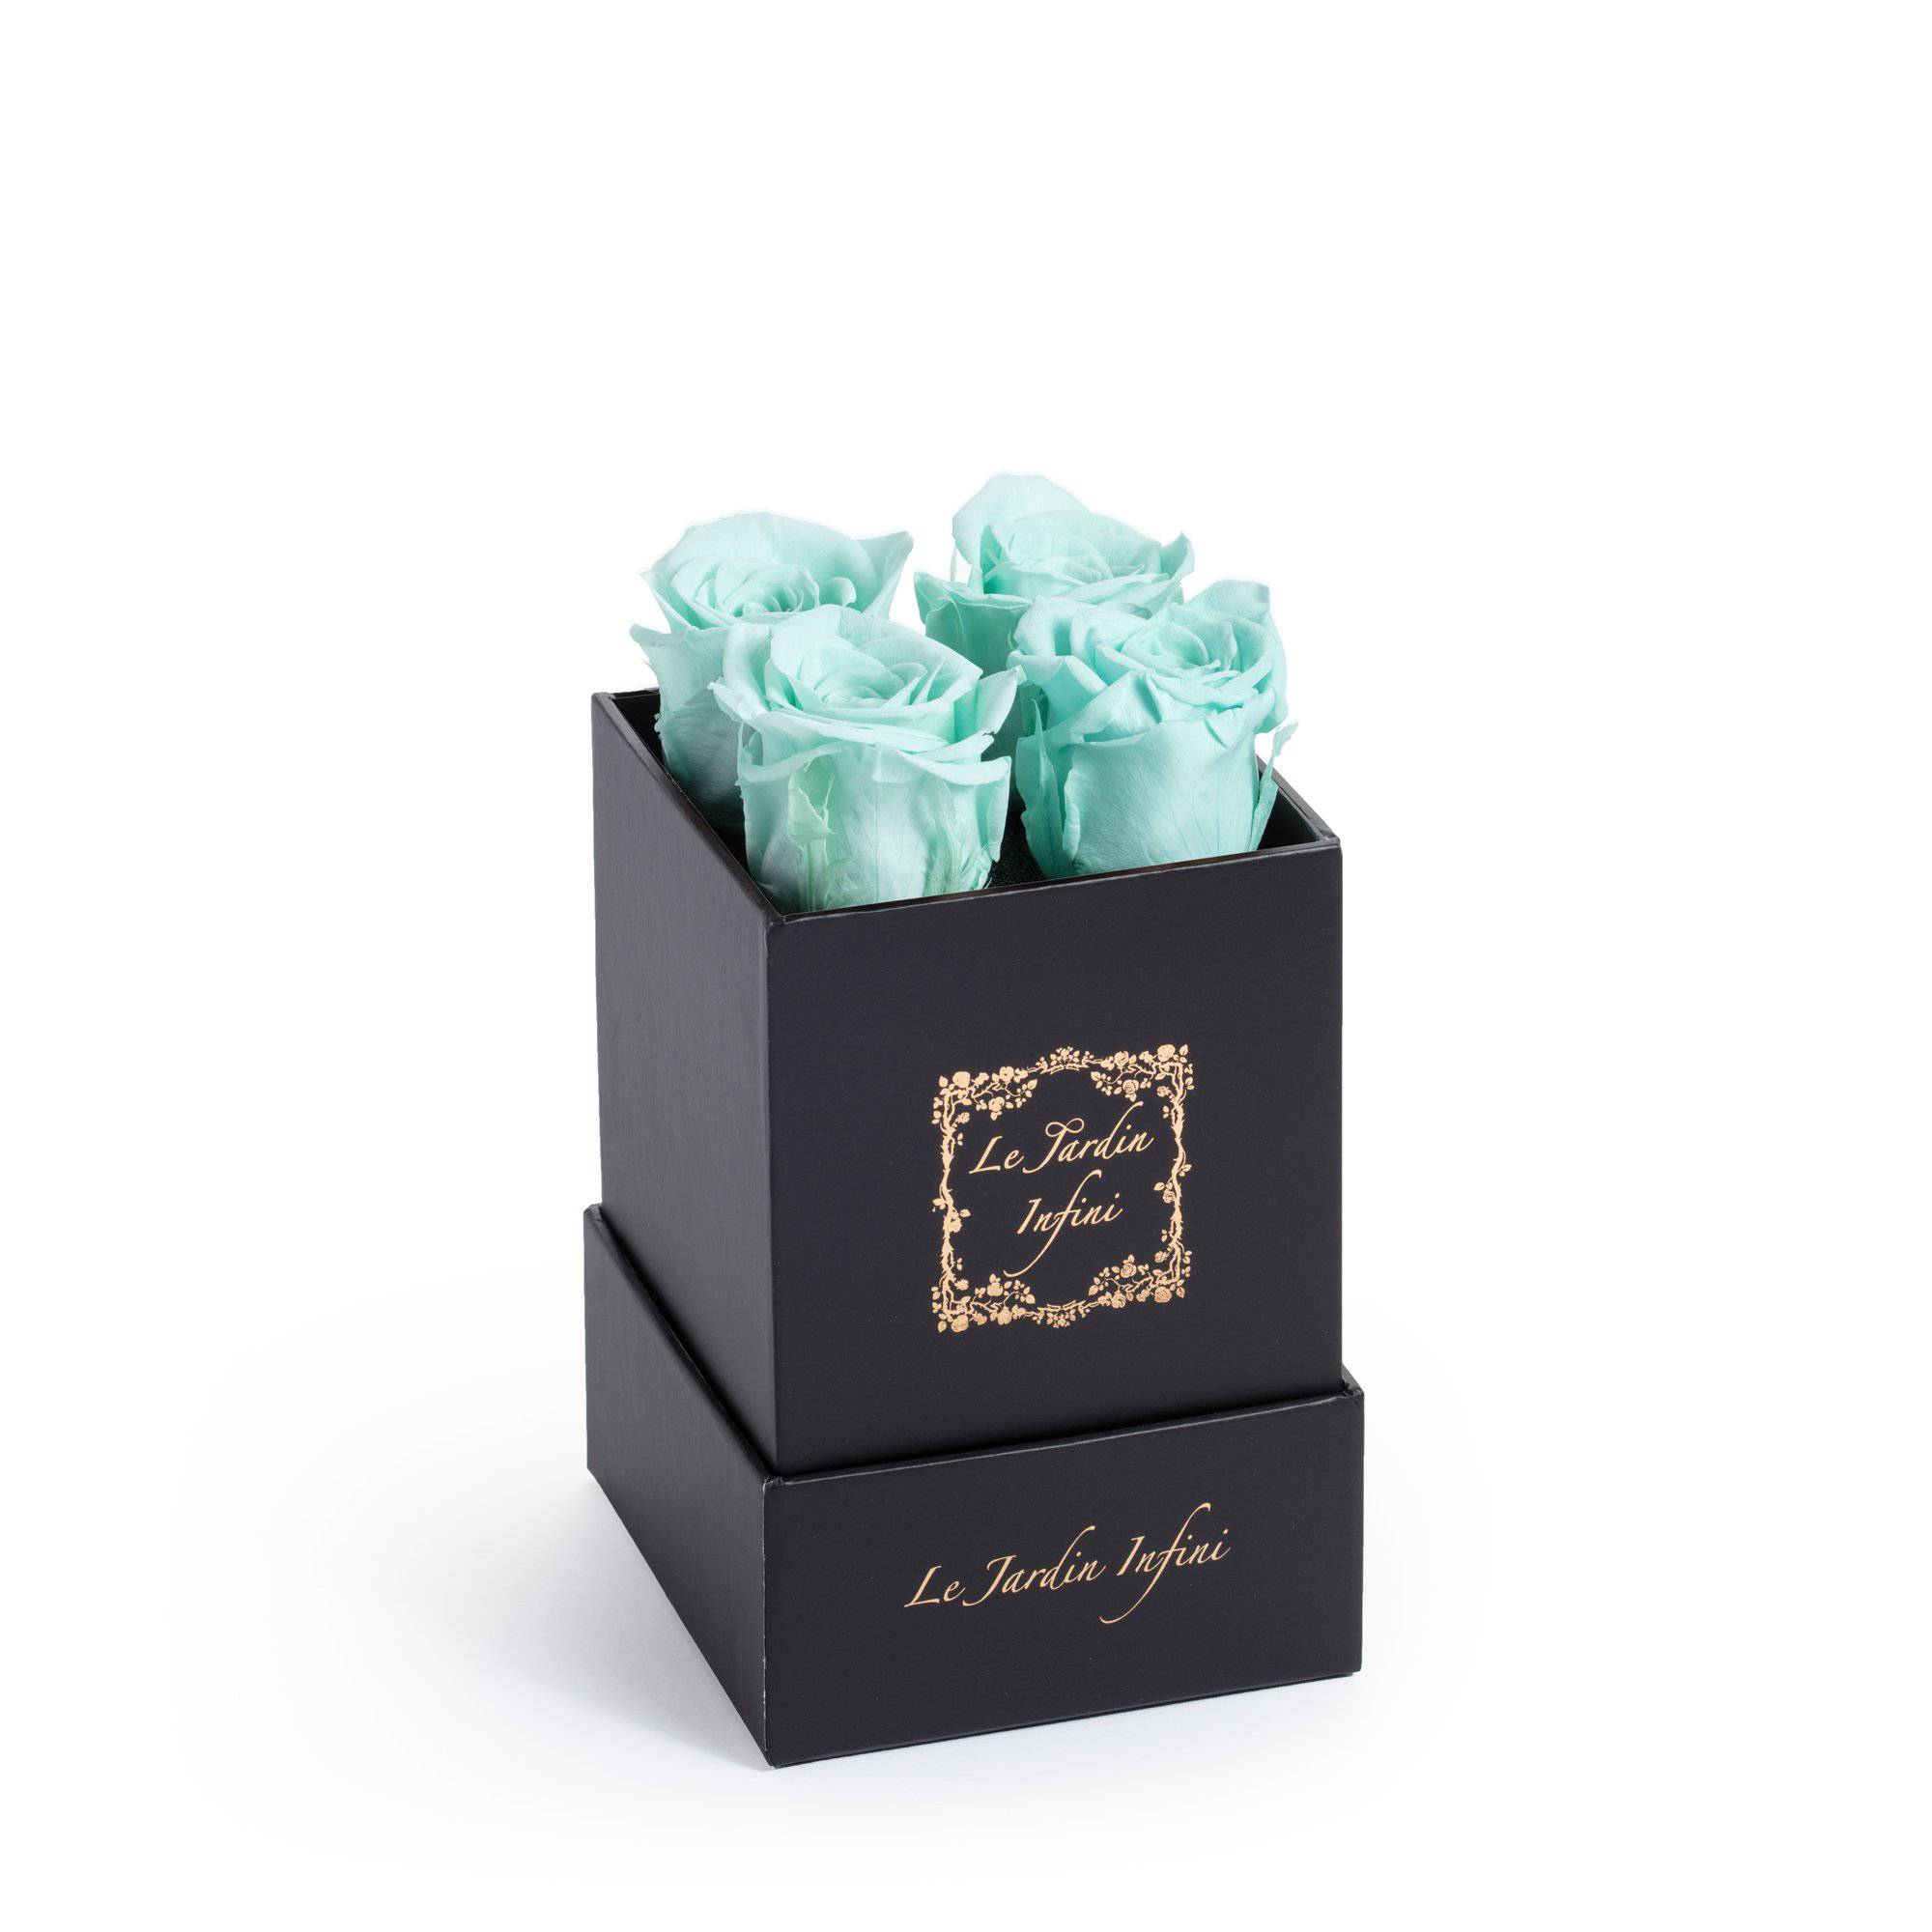 Light Green Preserved Roses - Small Square Black Box - Le Jardin Infini Roses in a Box